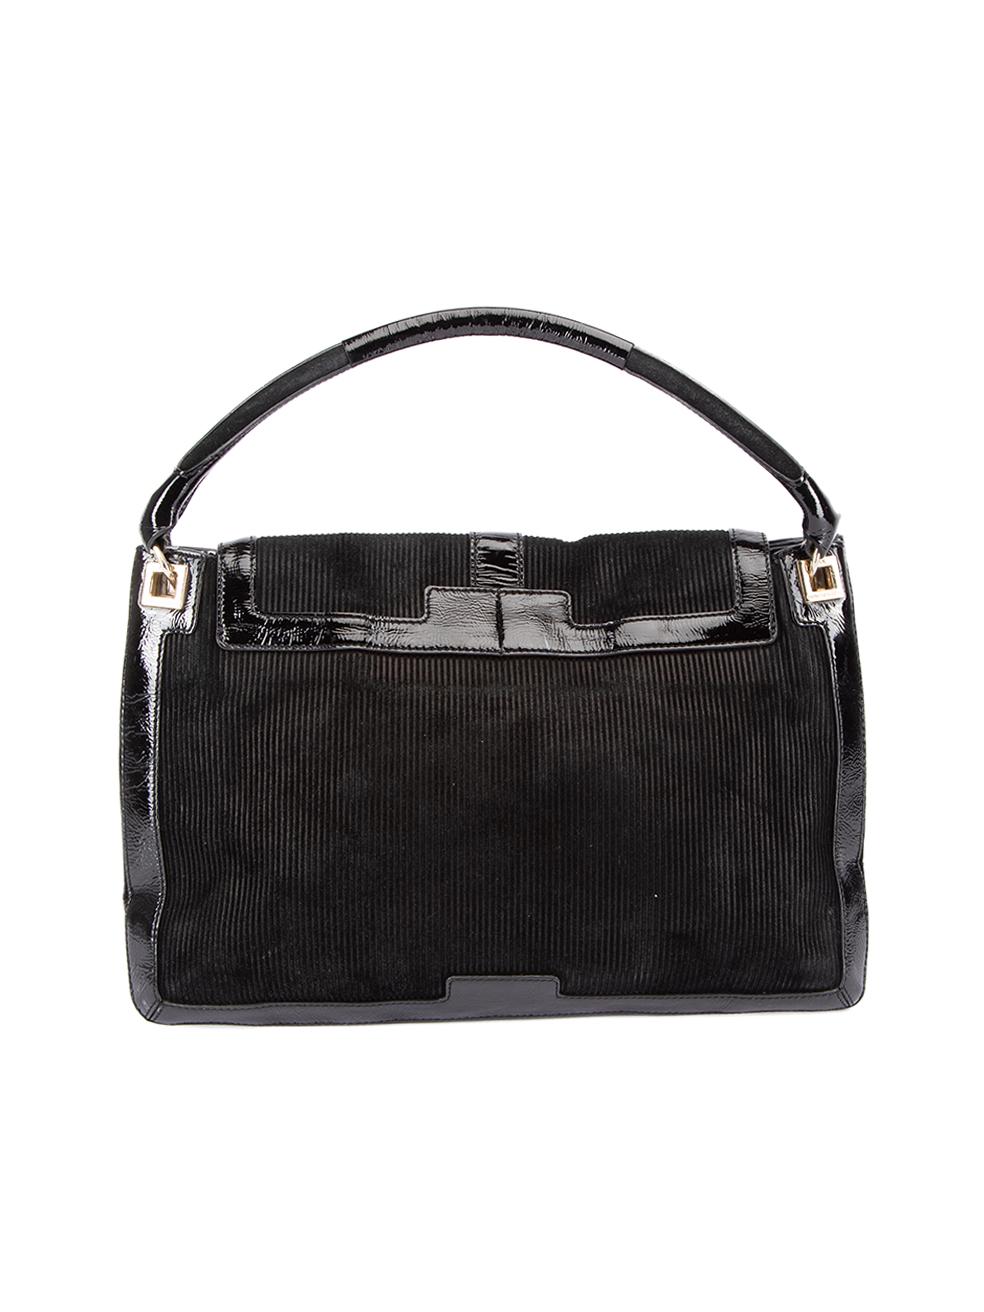 Anya Hindmarch Women's Black Corduroy Flap Shoulder Bag In Good Condition For Sale In London, GB